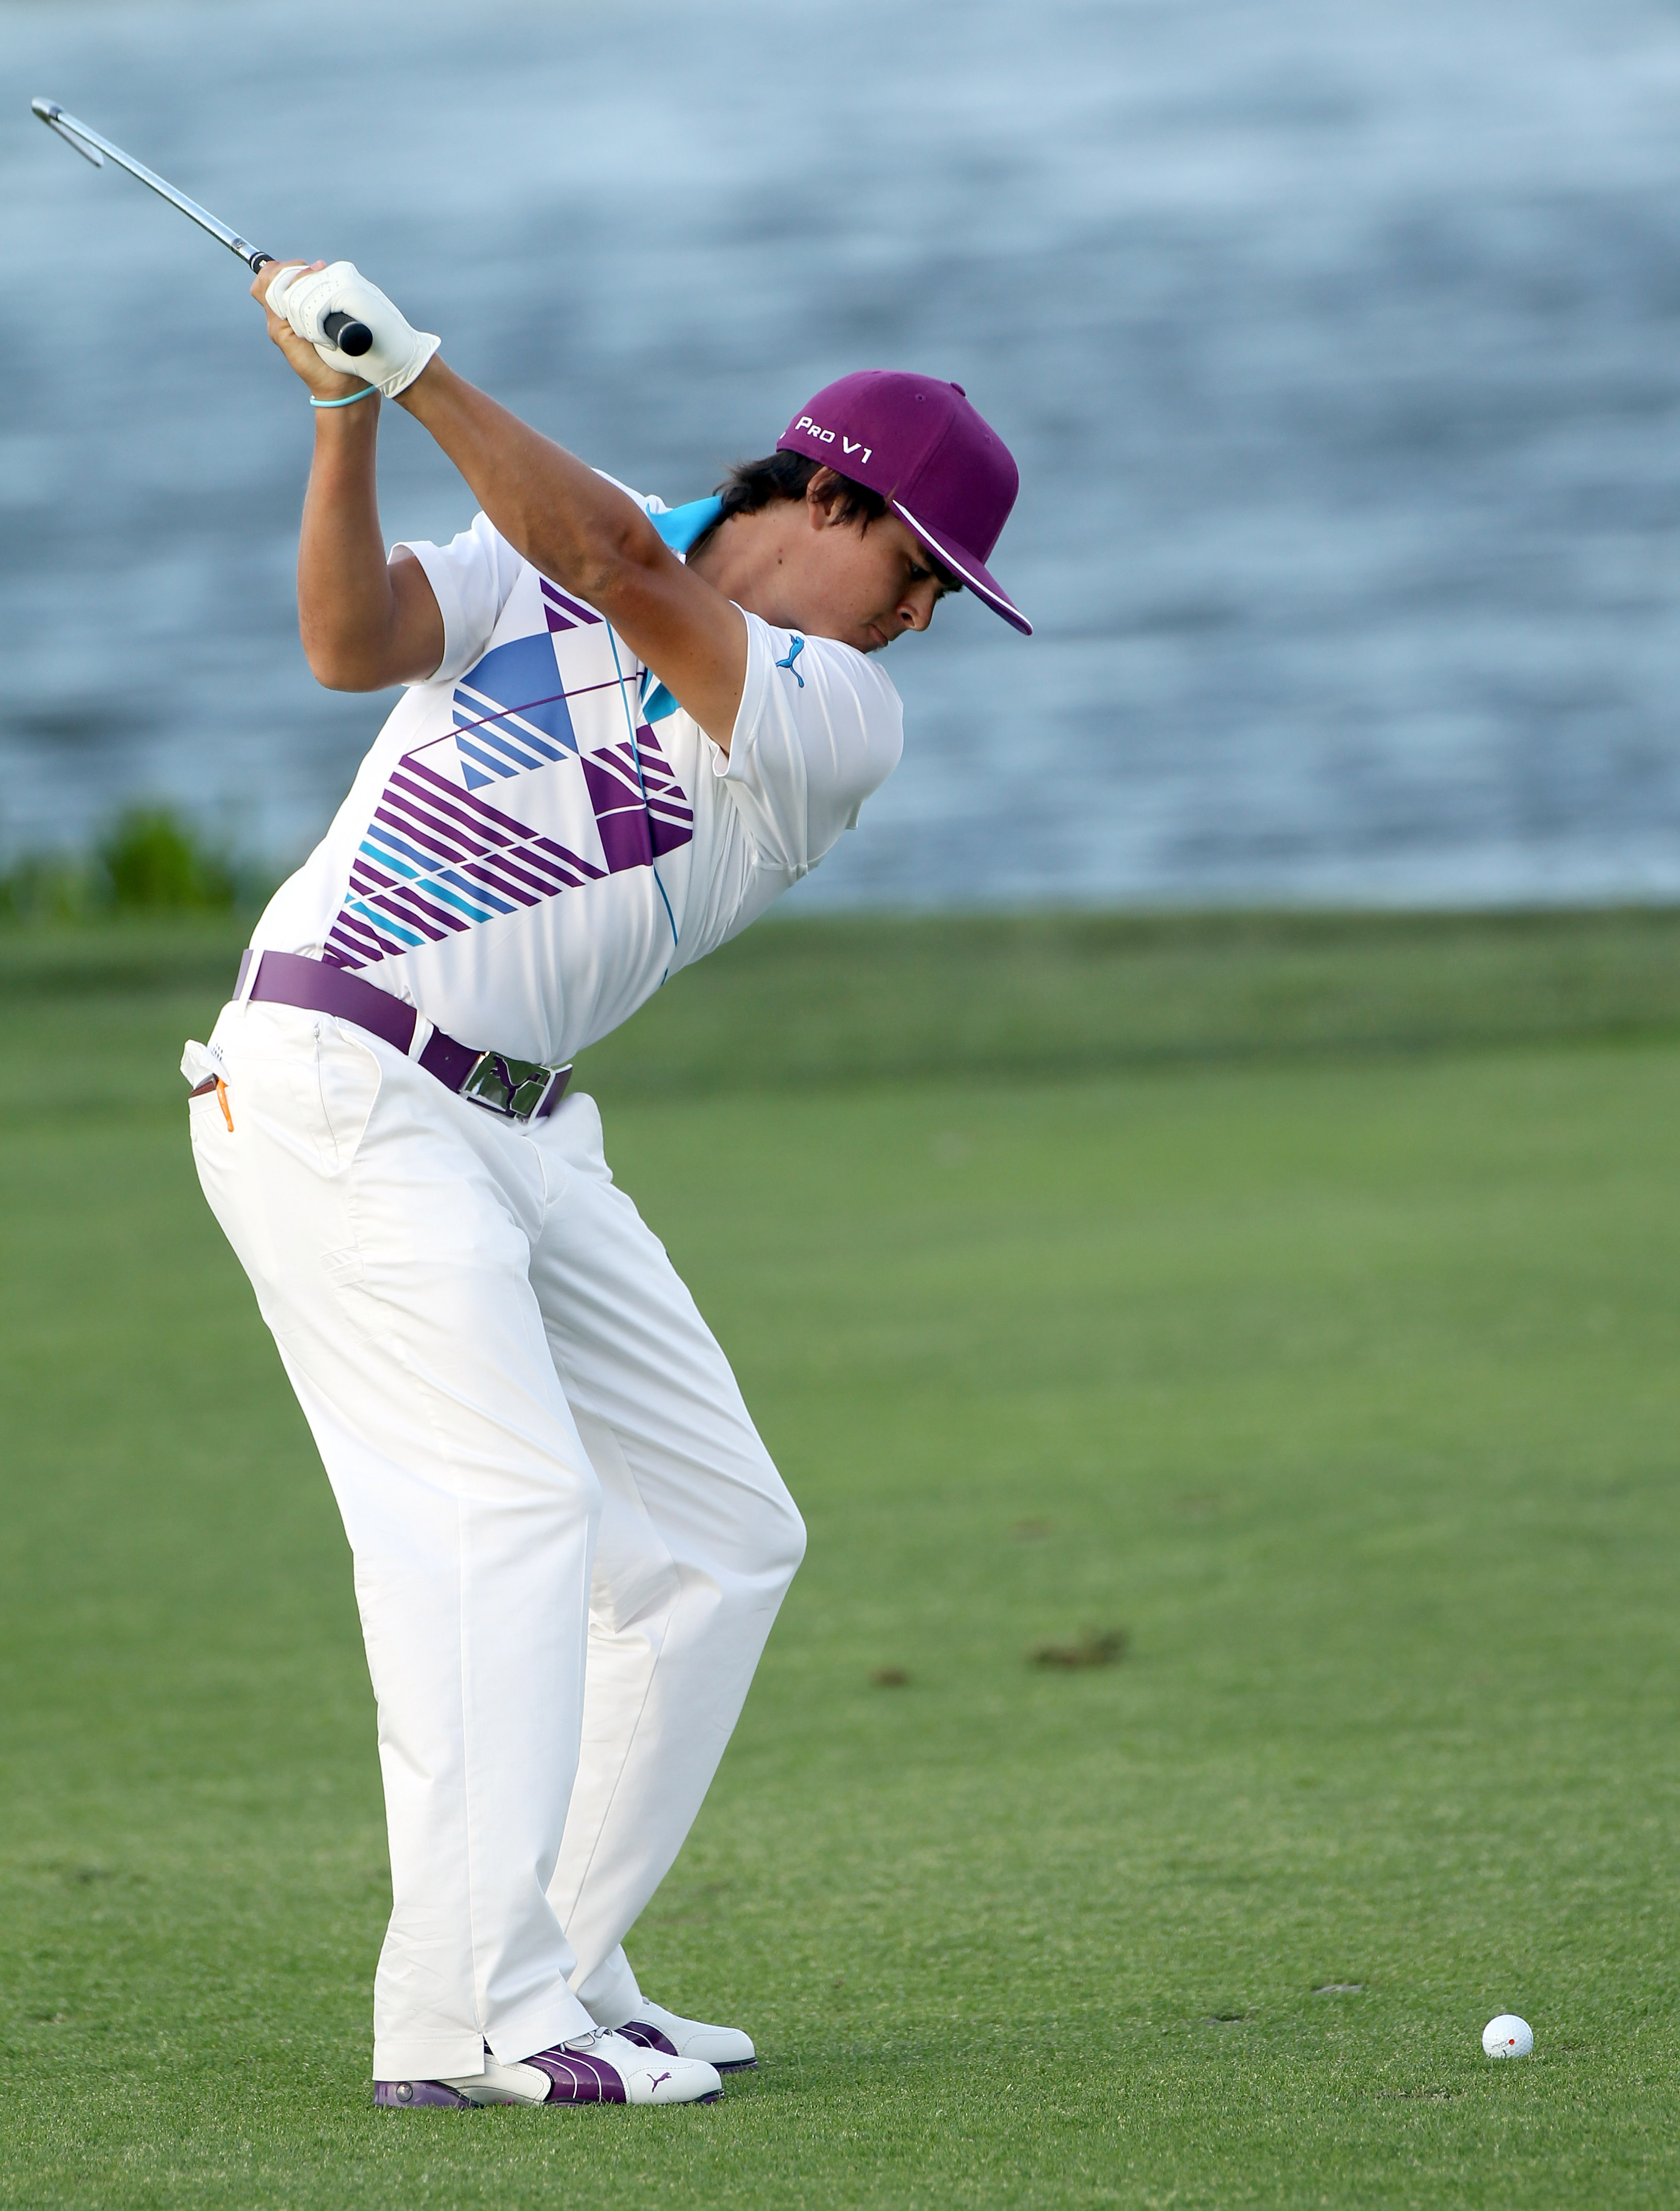 PALM BEACH GARDENS, FL - MARCH 03:  Rickie Fowler plays  a shot on the 17th hole during the first round of The Honda Classic at PGA National Resort and Spa on March 3, 2011 in Palm Beach Gardens, Florida.  (Photo by Sam Greenwood/Getty Images)